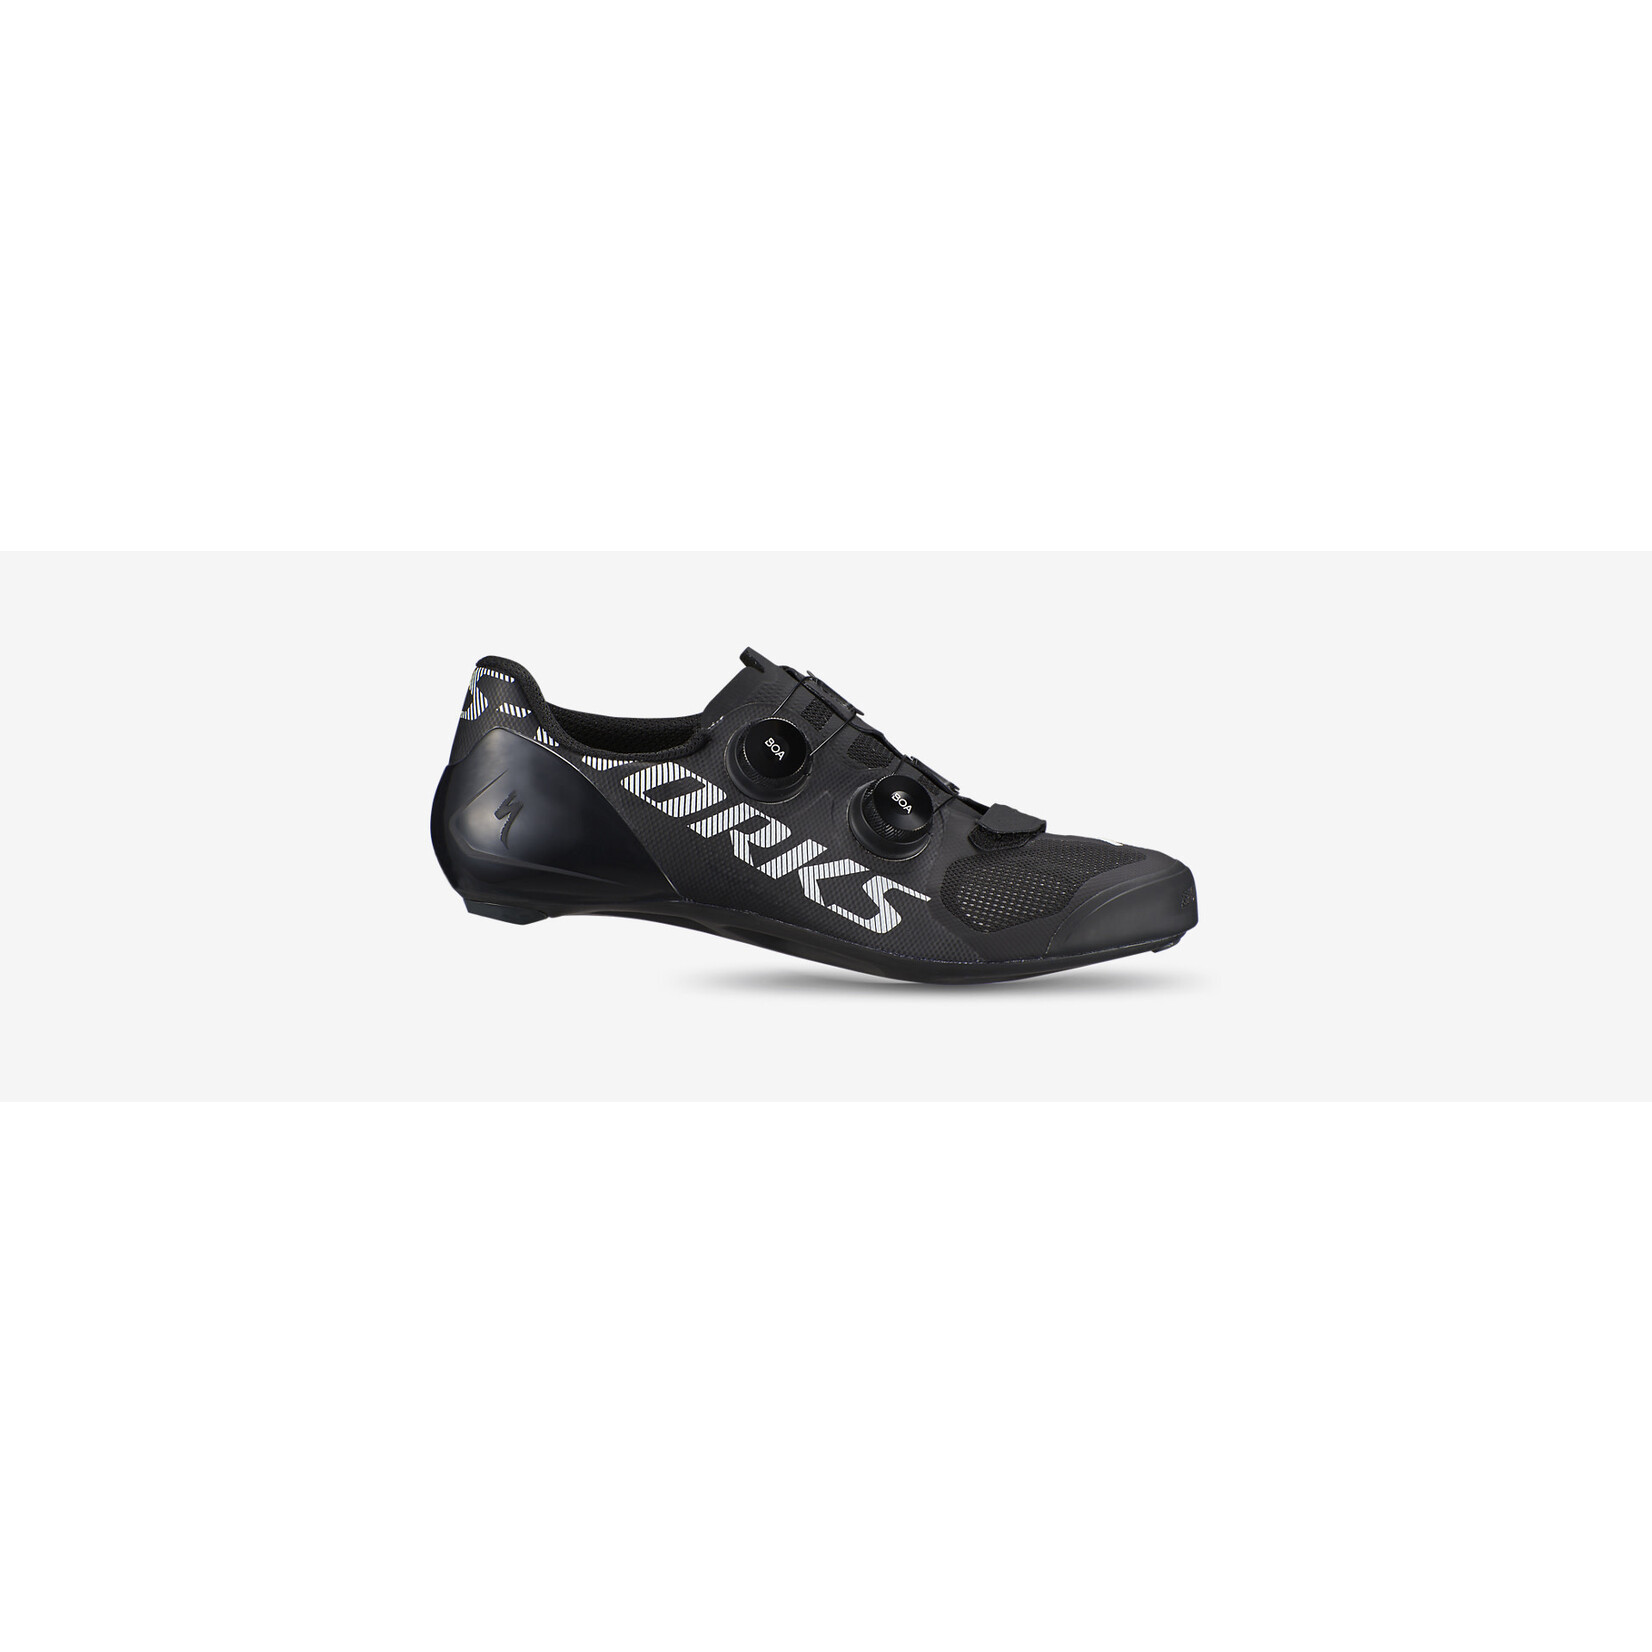 Specialized S Works Vent Road Shoe